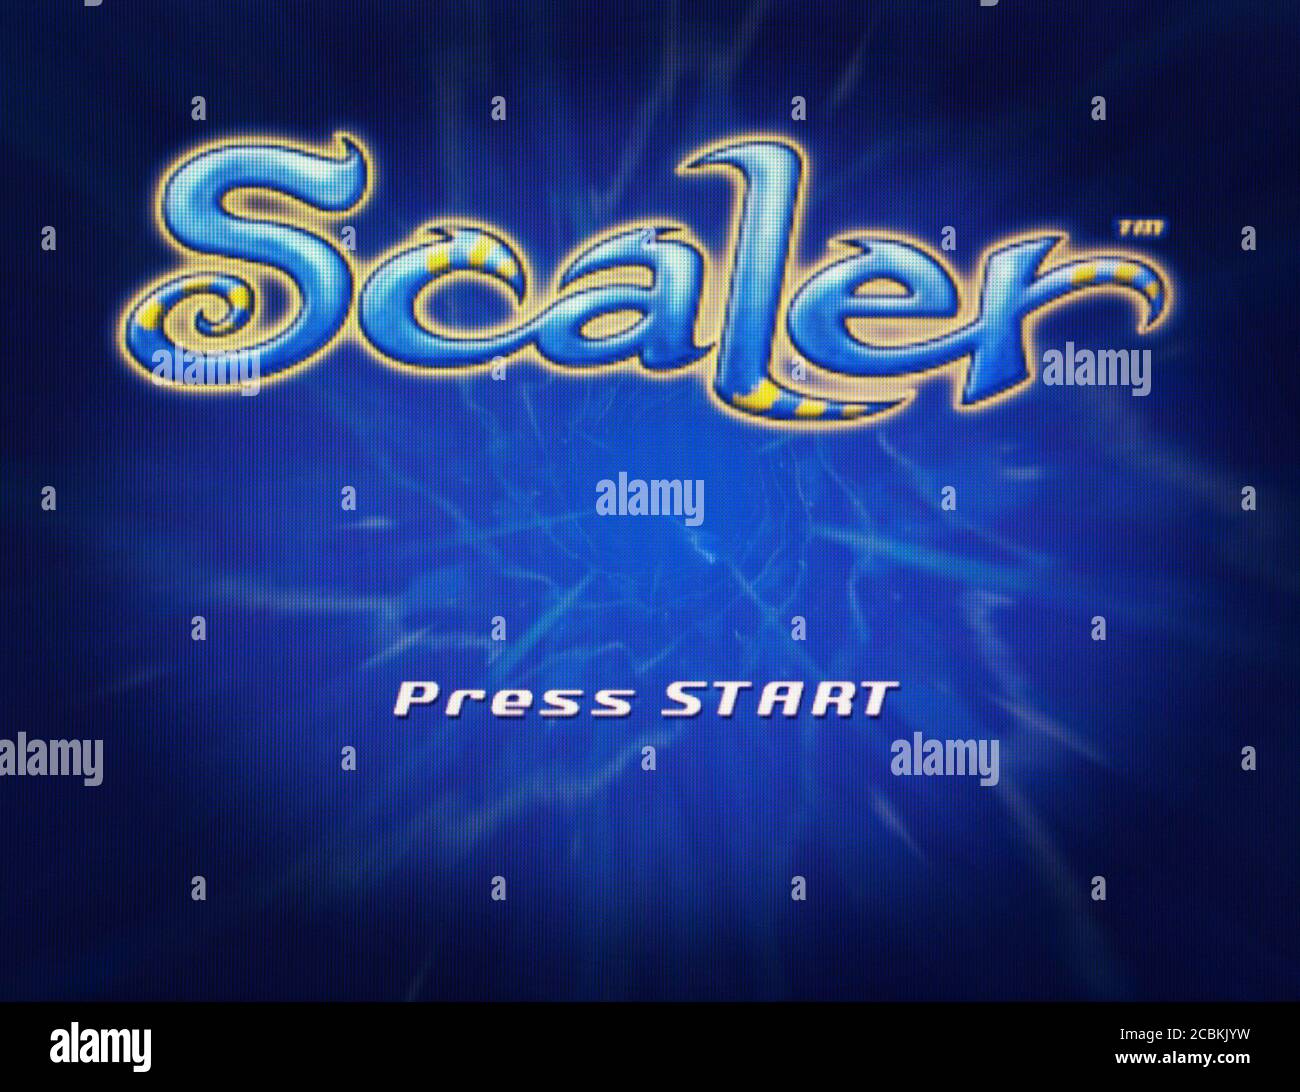 Scaler - Nintendo Gamecube Videogame - Editorial use only Stock Photo